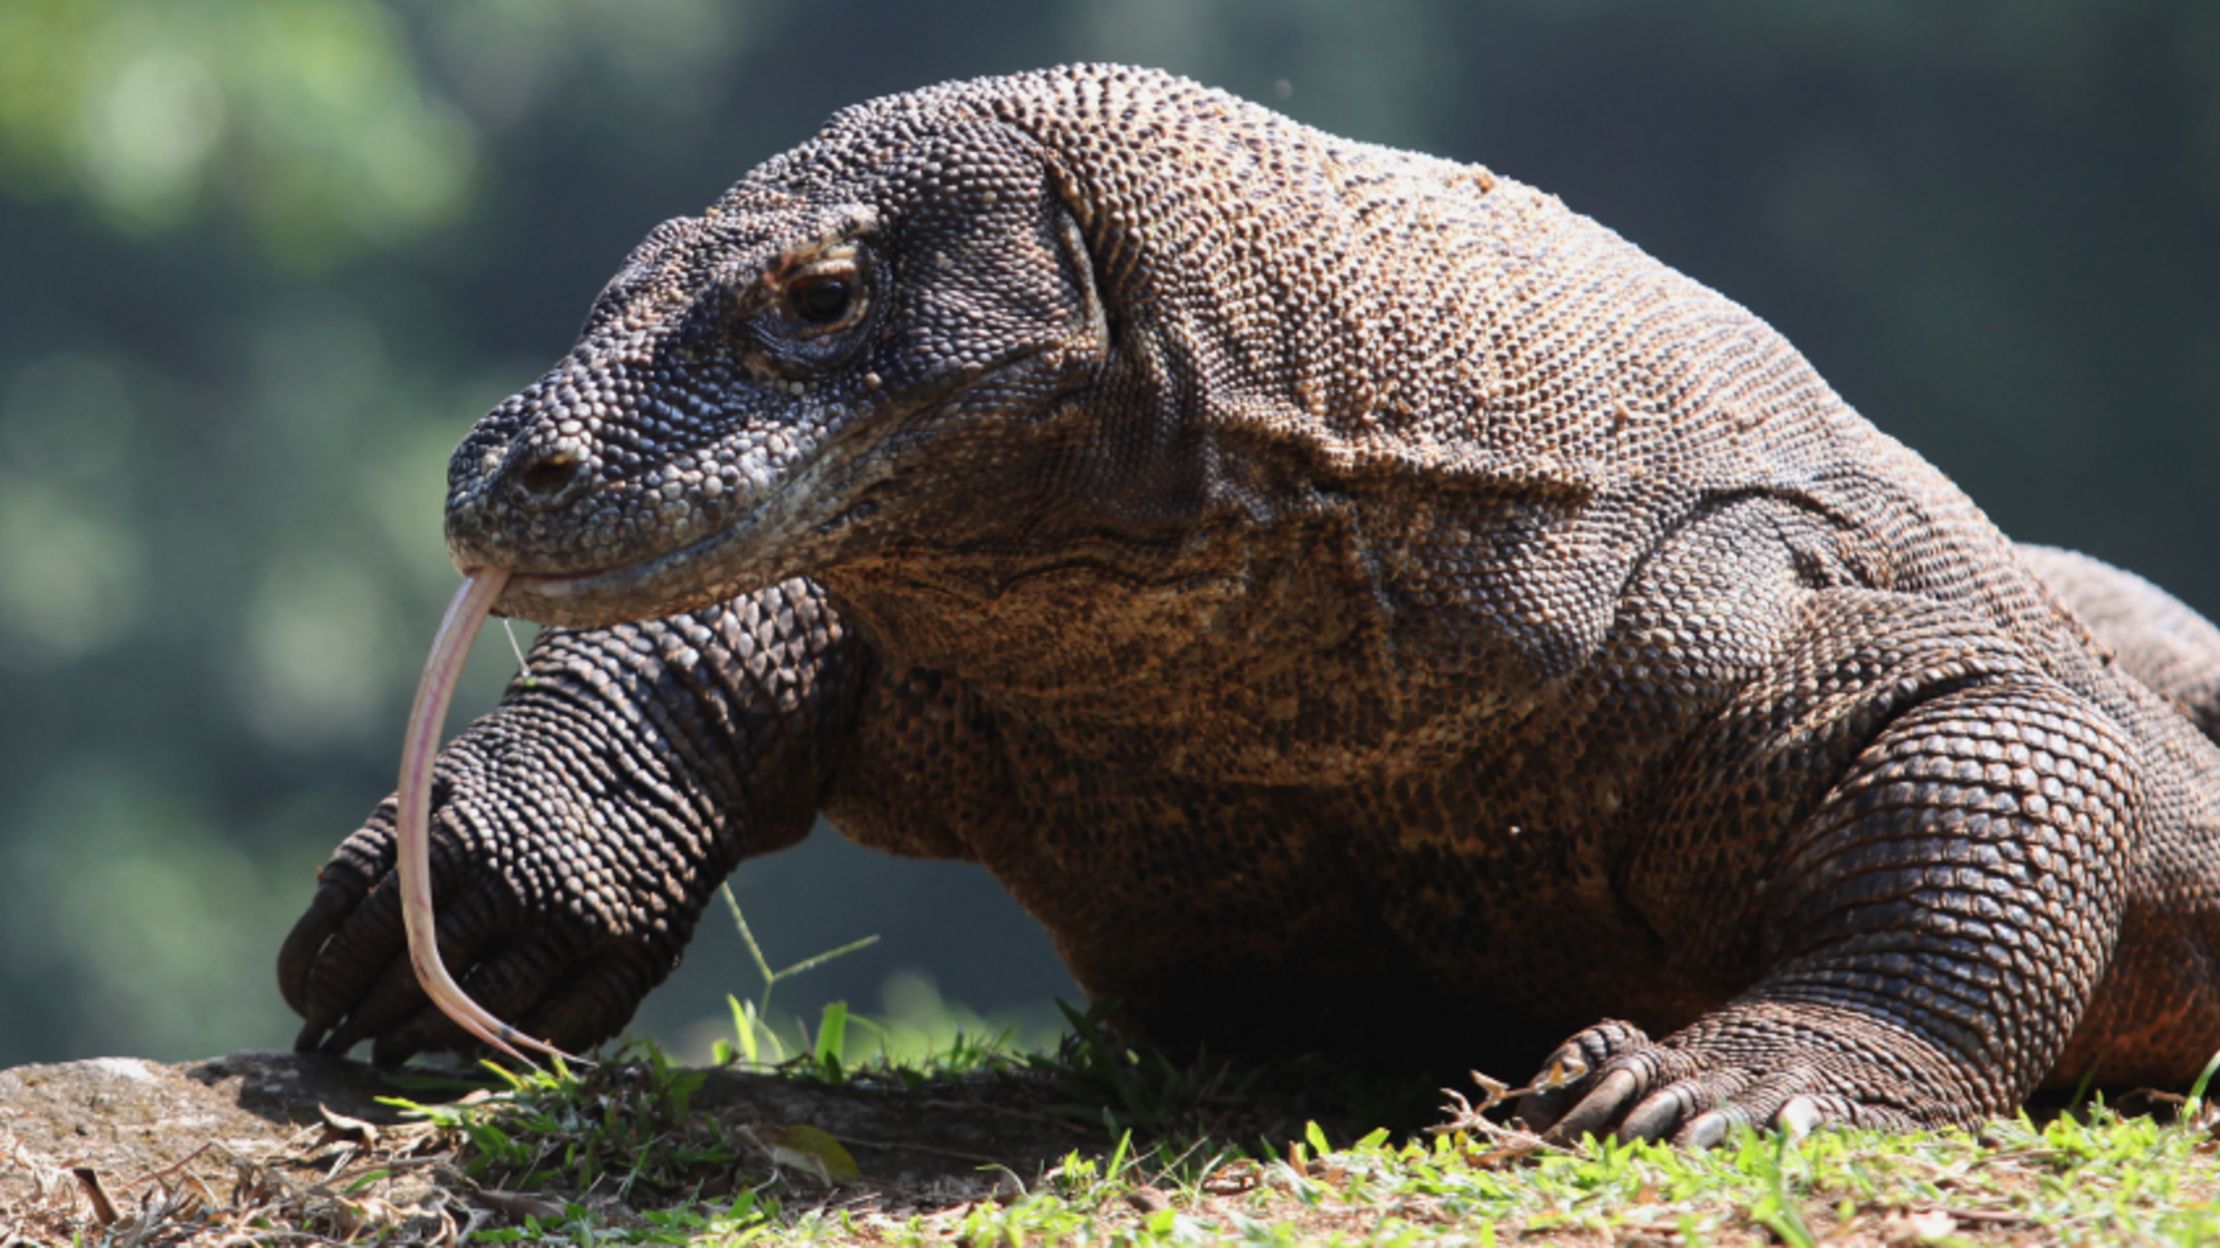 10 Amazing Facts About Komodo Dragons | Mental Floss